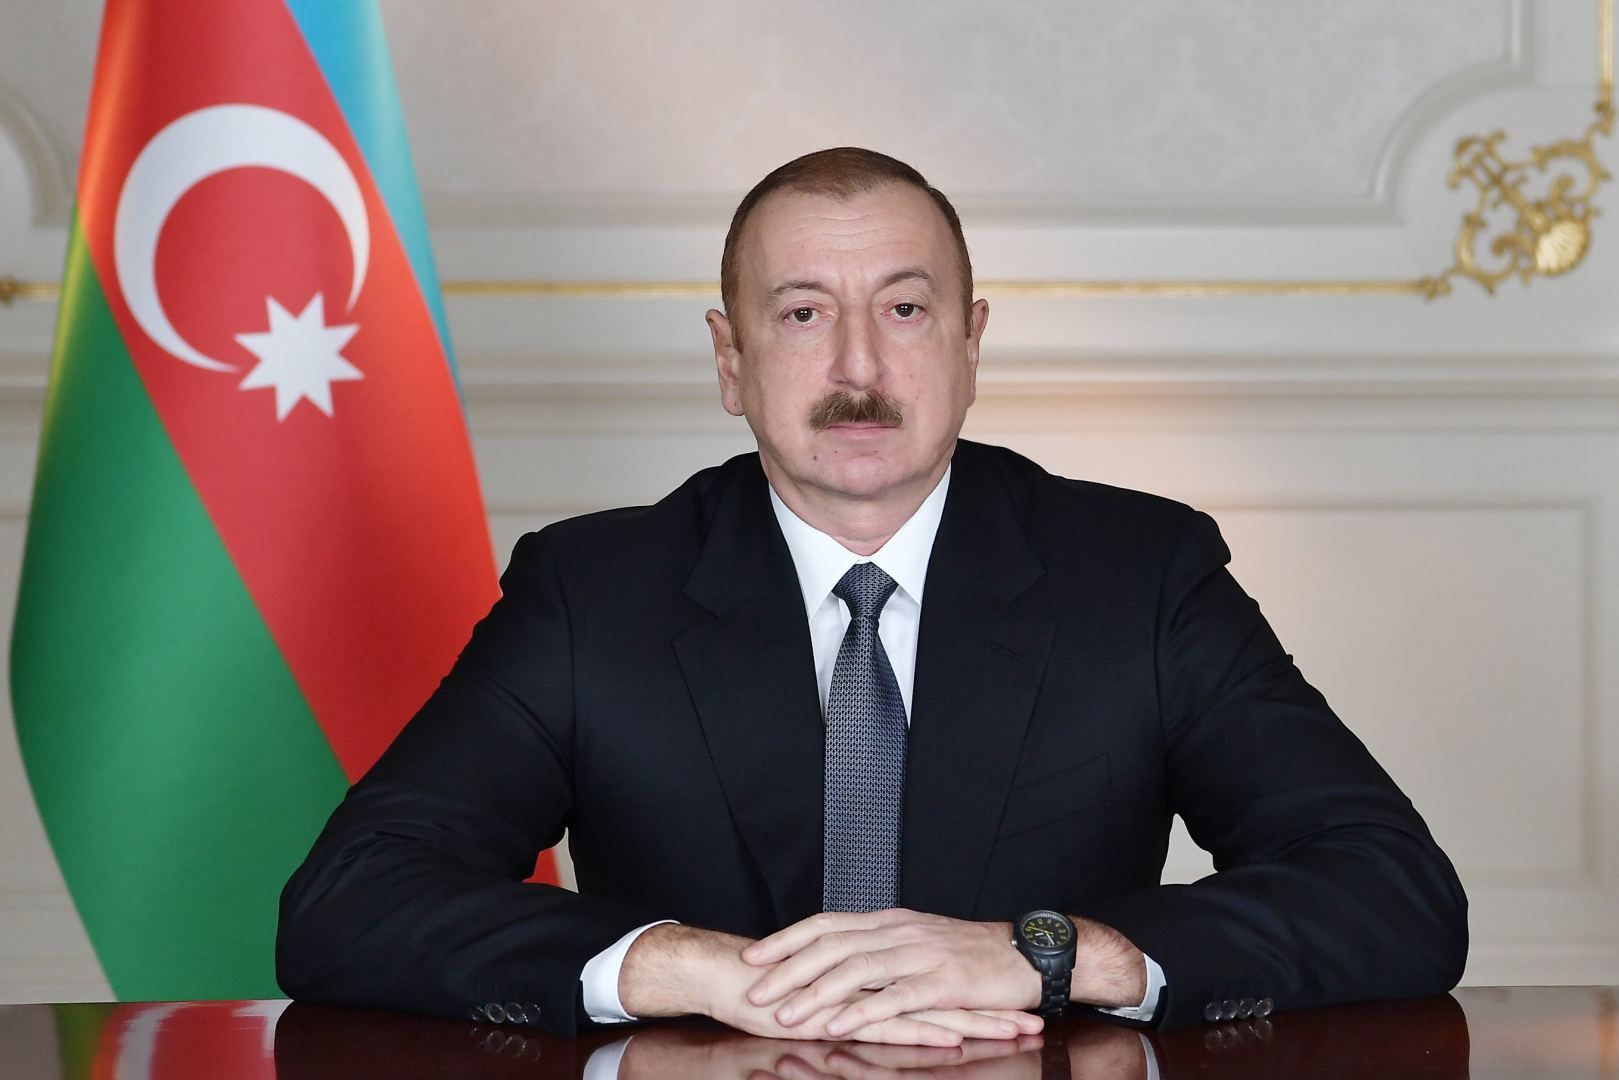 Azerbaijani President addresses participants of int'l conference themed "Increasing national and global efforts to clarify fate of missing persons" [UPDATE]